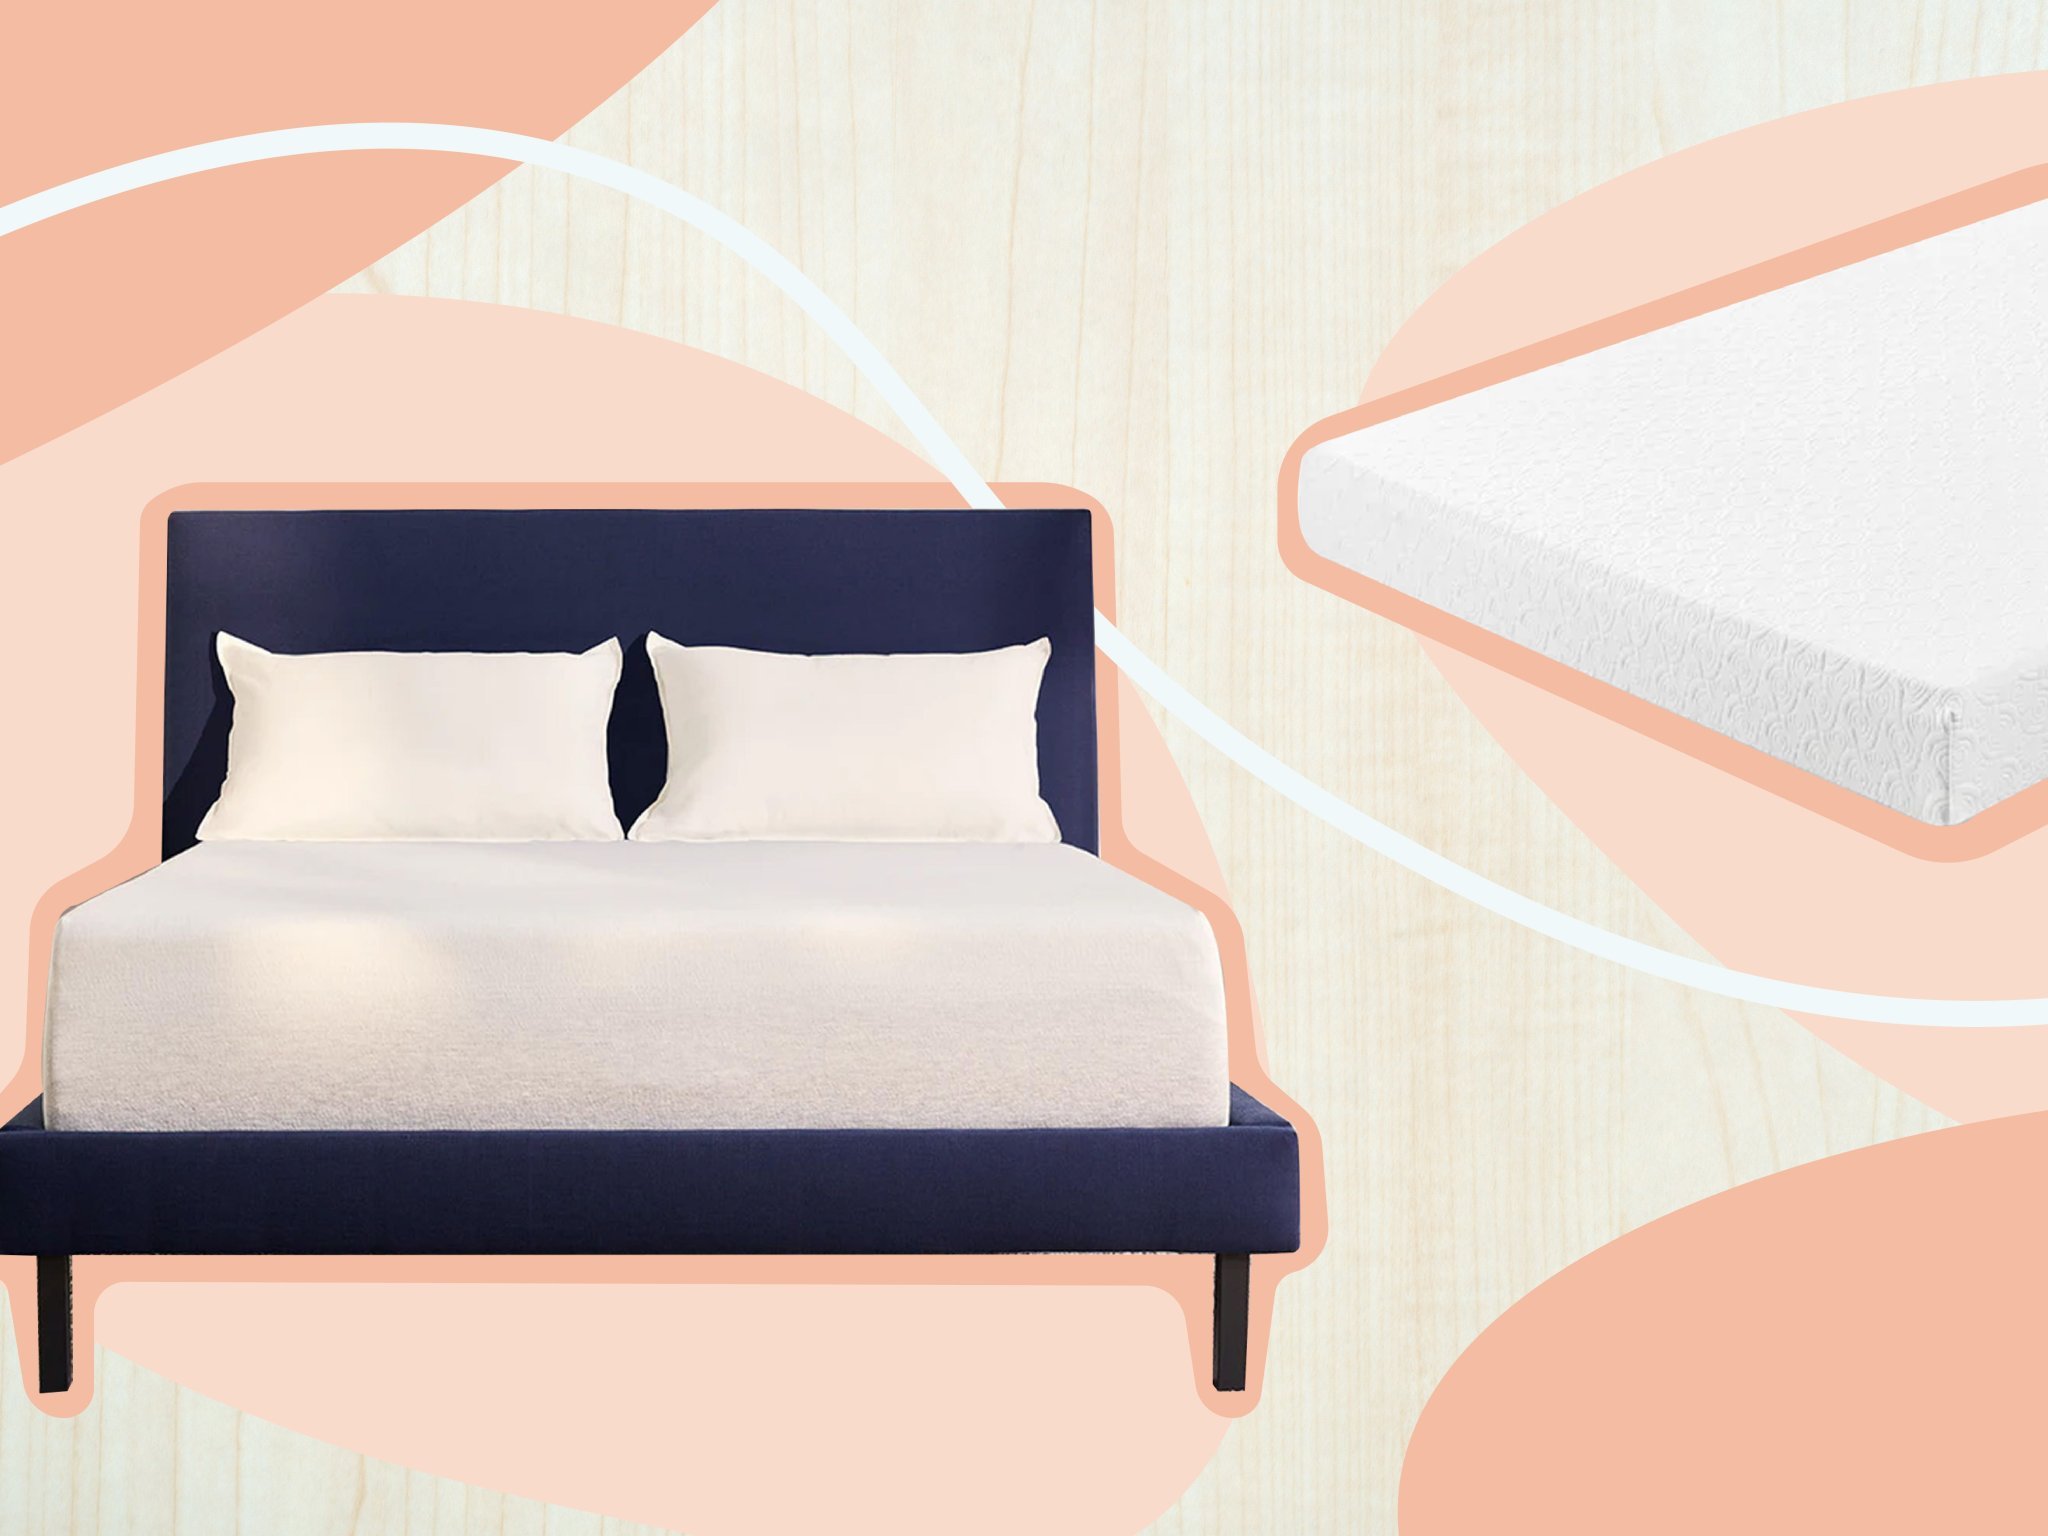 Treat Yourself to a New Mattress With These Amazing Deals